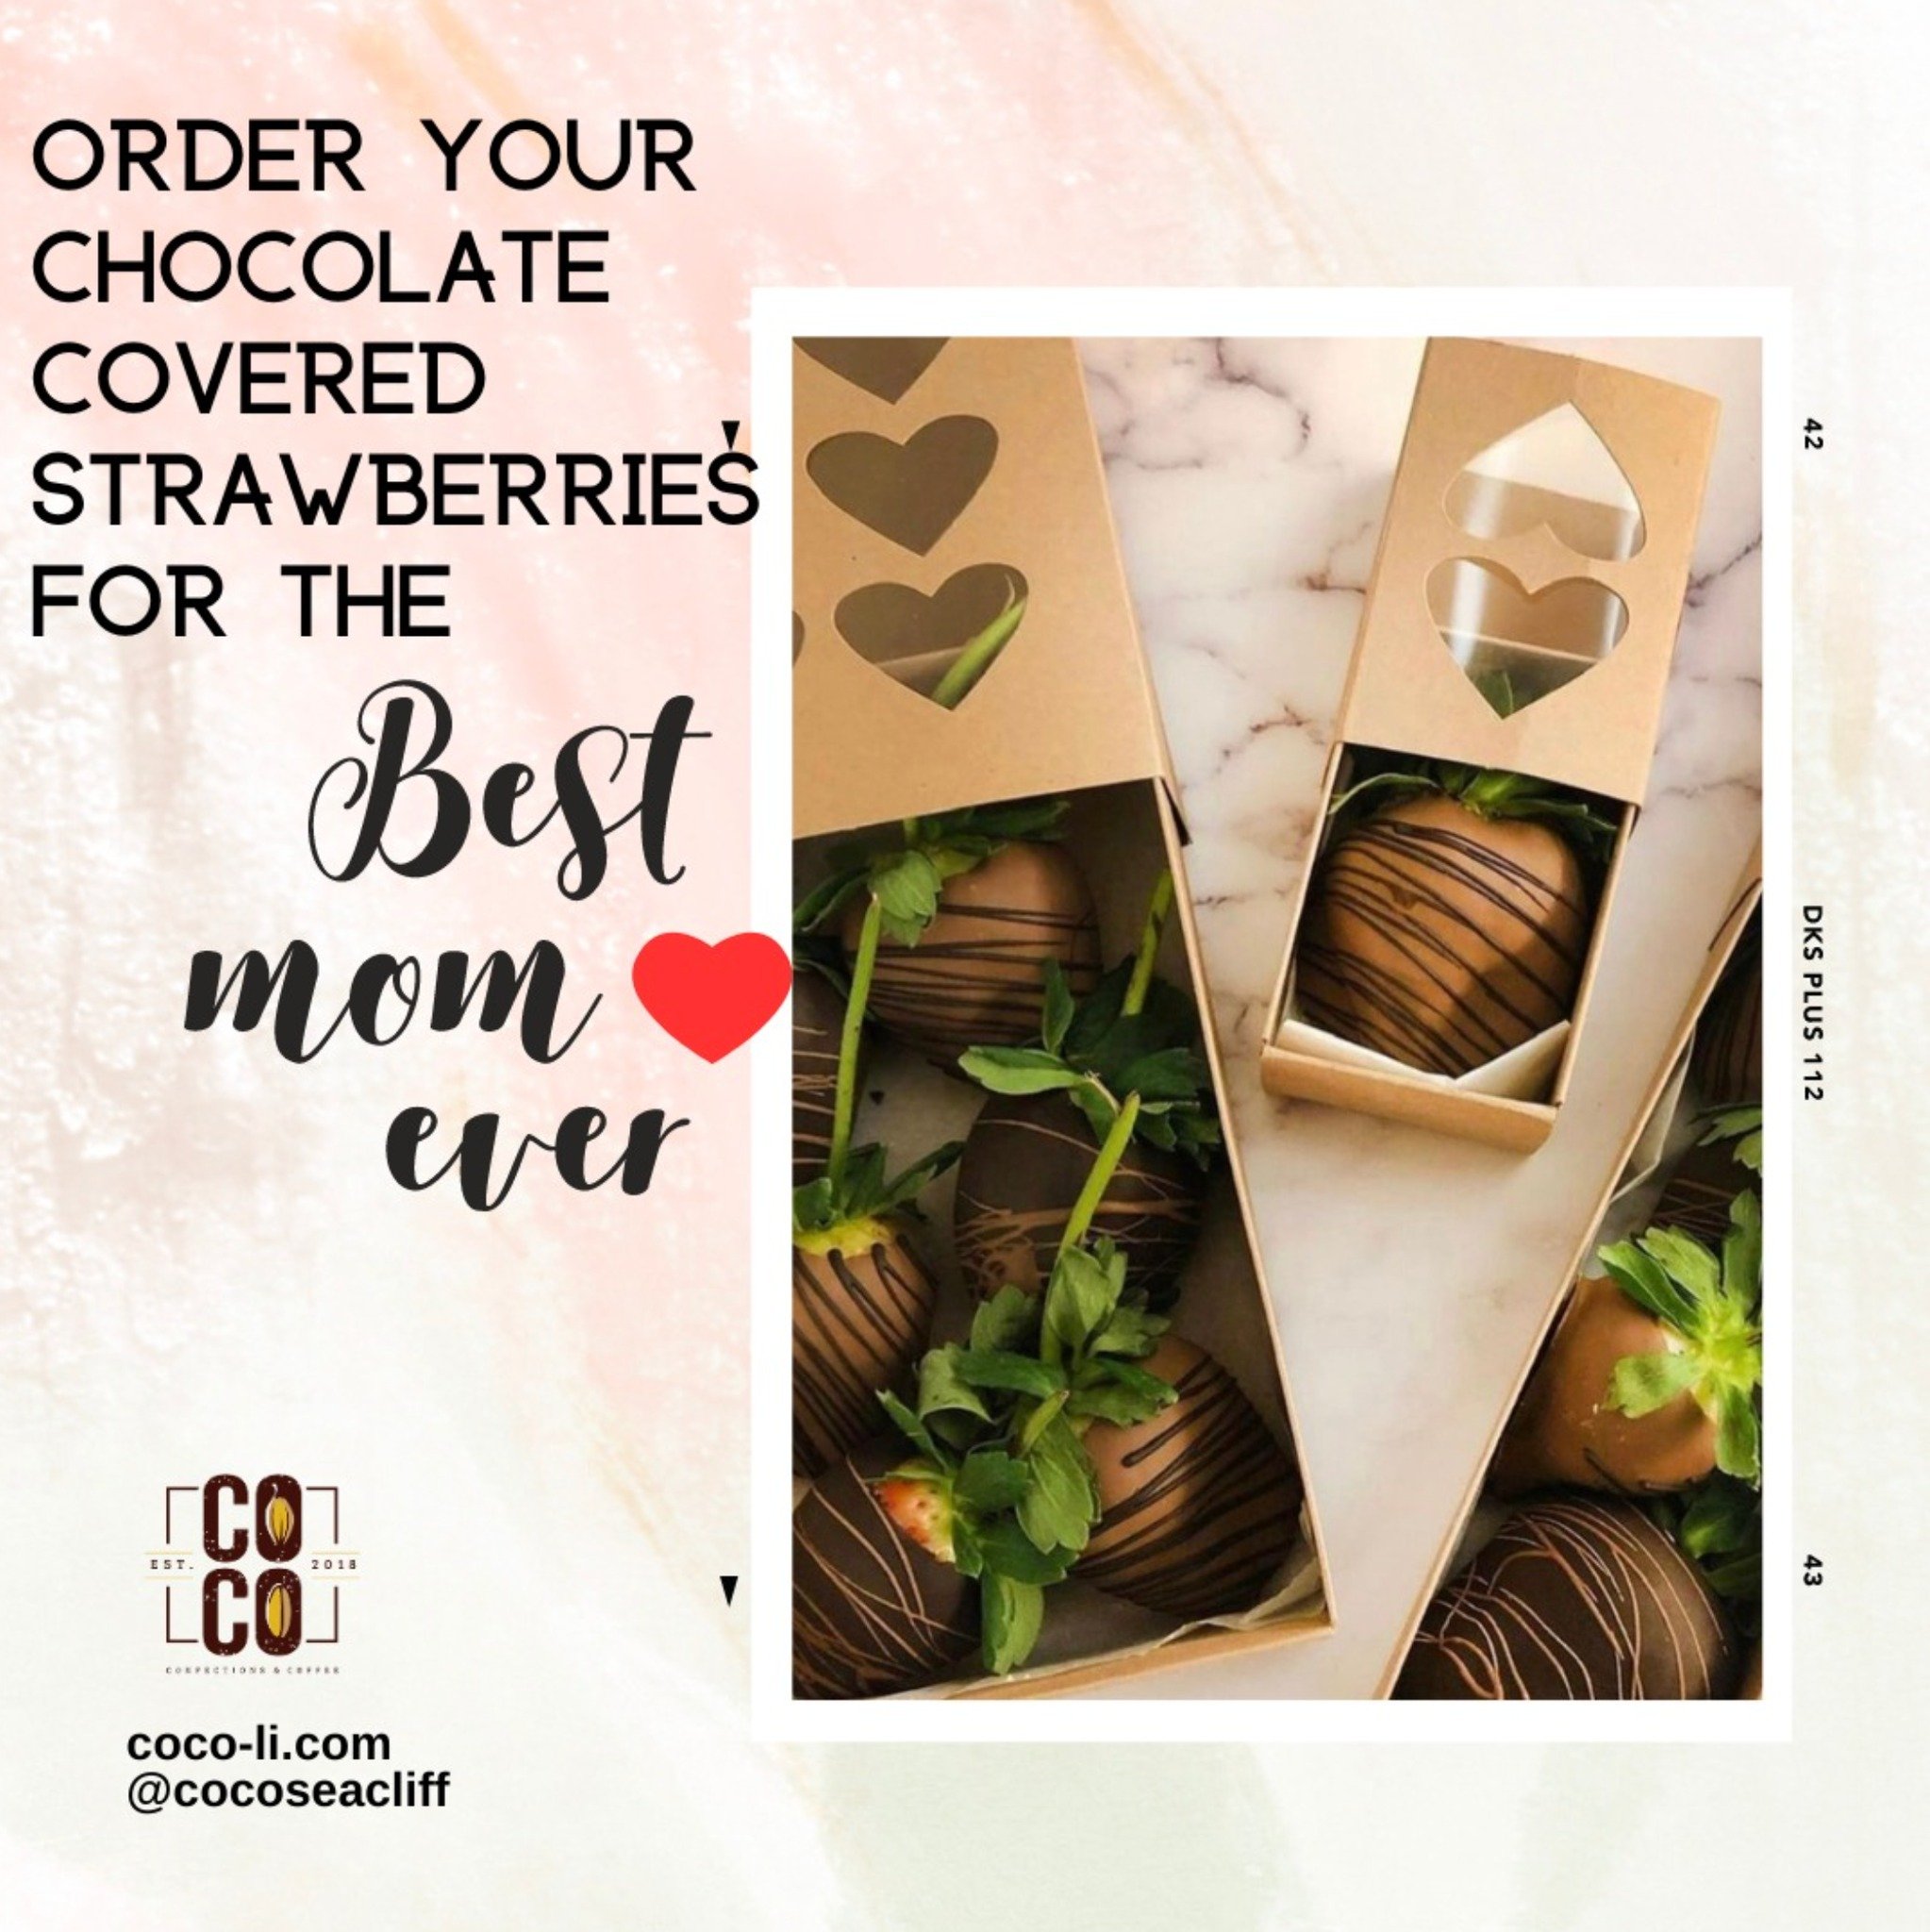 Have you ordered Chocolate Covered Strawberries for the Best Mom Ever yet?? 🍓❤️
coco-li.com
516-277-2657

#COCO #COCOseacliff #mothersday #truffles #choocolatier #confections #giftcard #foodporn #beautifultruffles #delicioustruffles #coffeeshop #sea